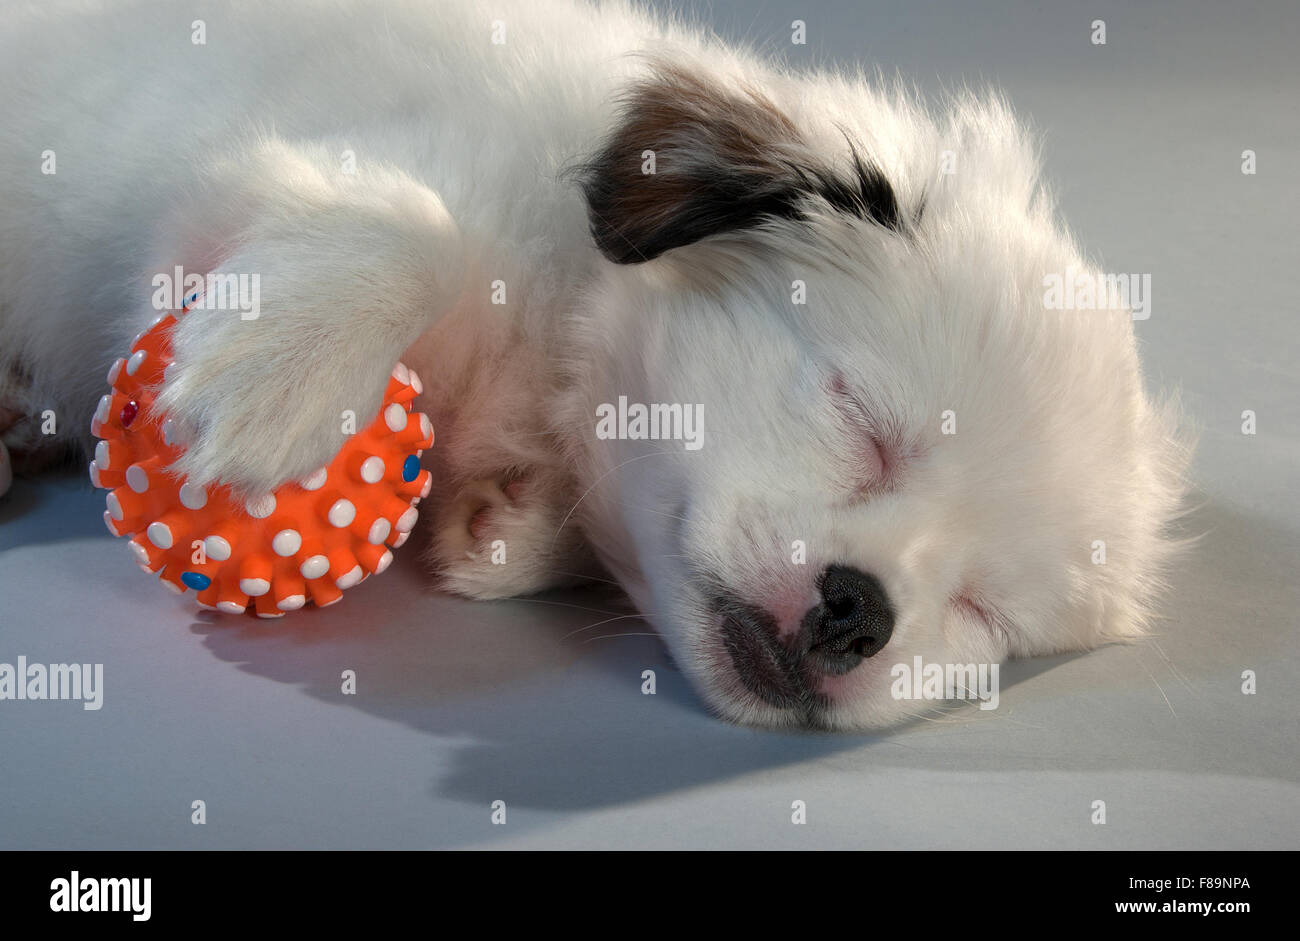 Portrait of the sleeping puppy of companion mixes with an orange ball. gray background, horizontal format. Stock Photo